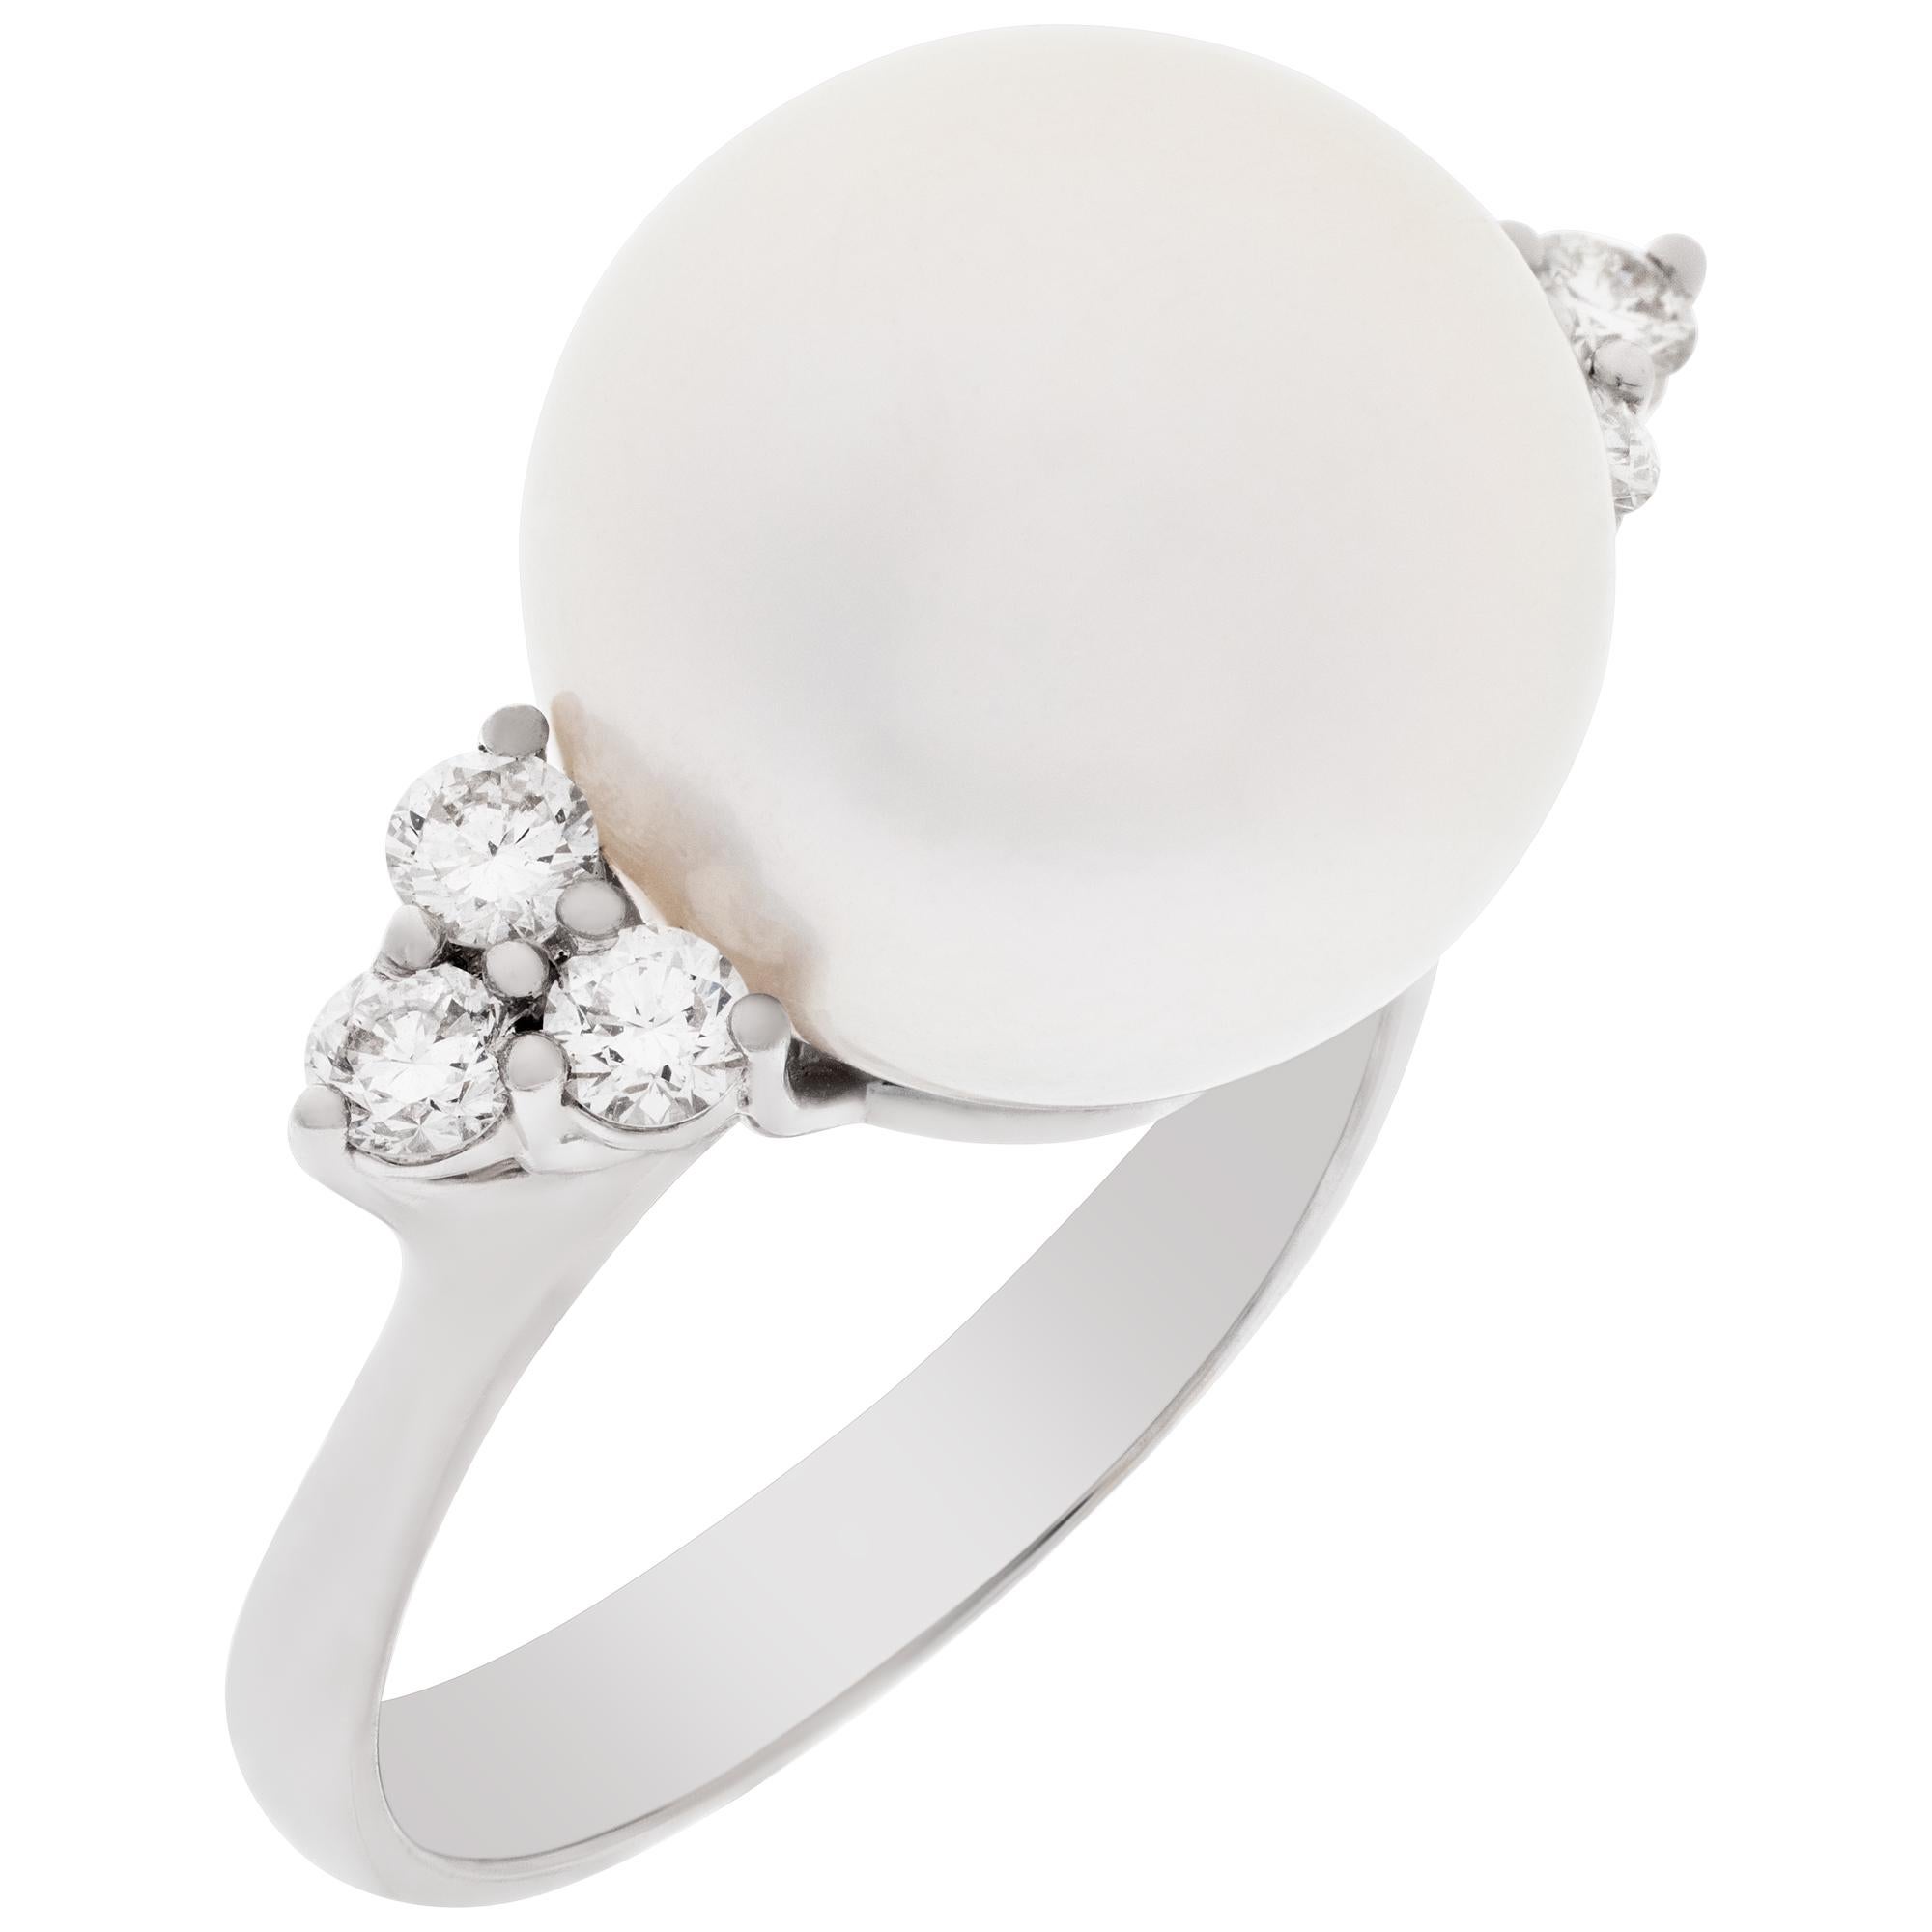 South Sea Pearl & Diamonds Ring Set in 18K White Gold In Excellent Condition For Sale In Surfside, FL